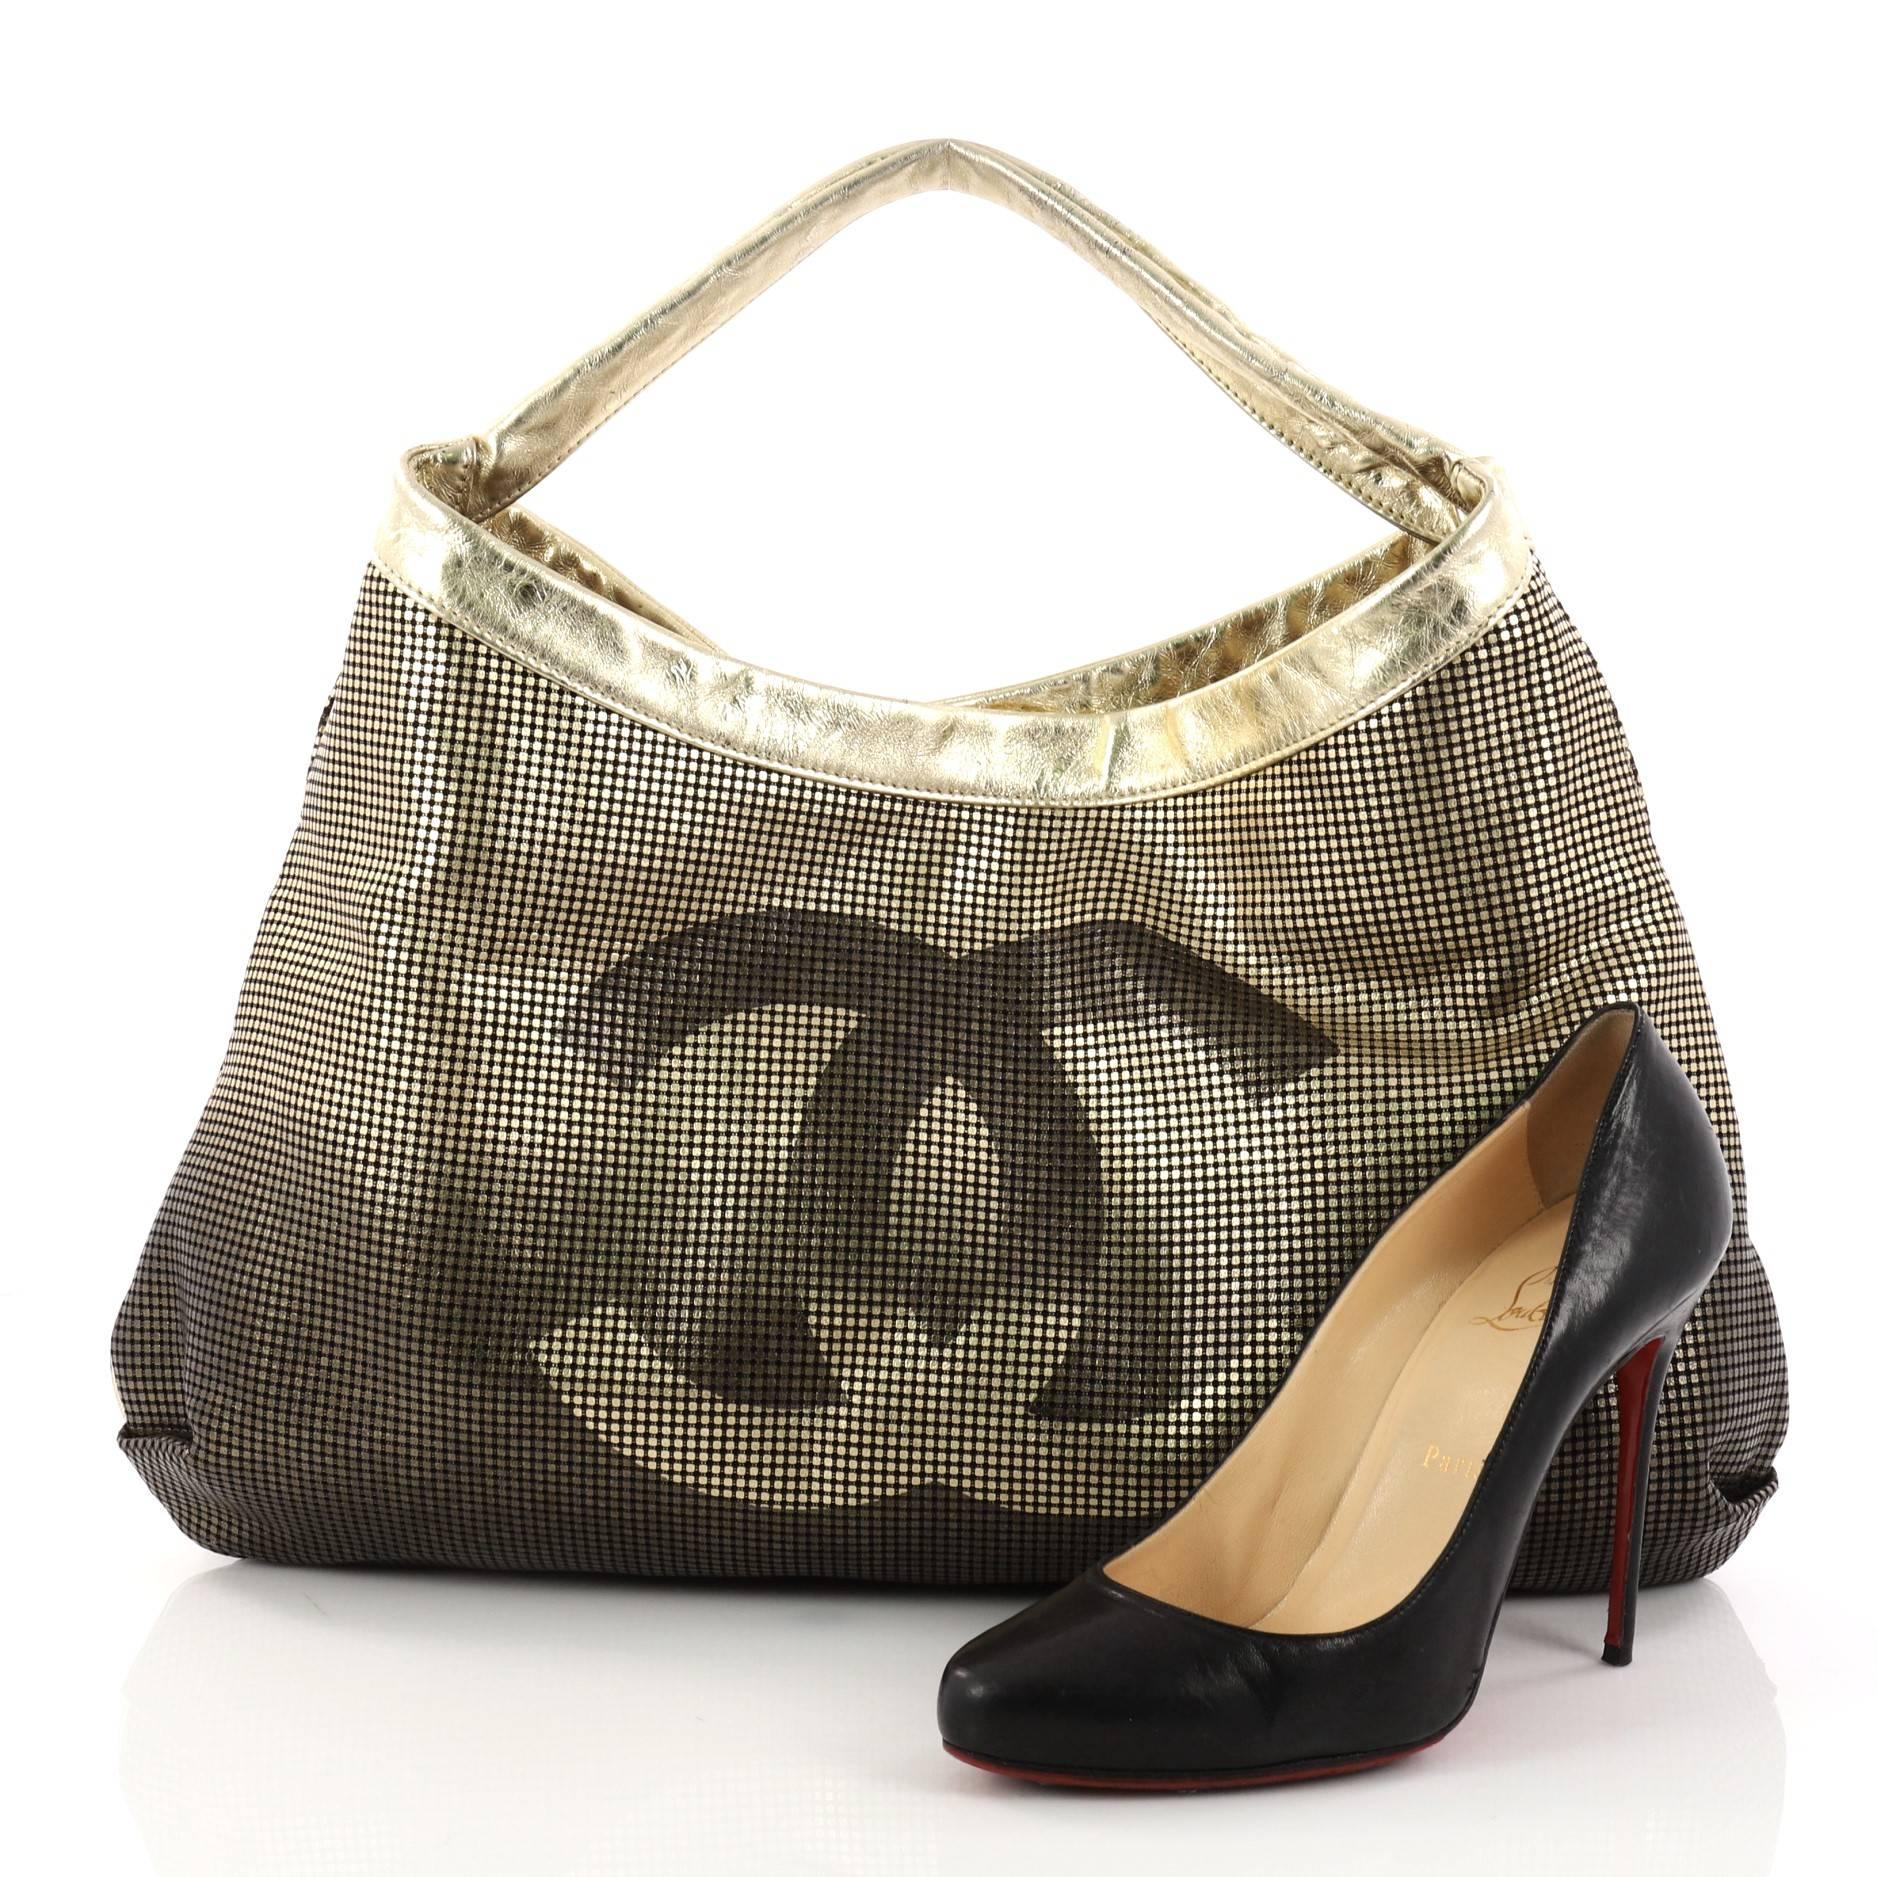 This authentic Chanel Hollywood Hobo Perforated Leather East West is a chic sports-inspired look made for everyday use. Crafted from metallic gold and black ombre perforated leather, this hobo features frontal Chanel CC logo, gold leather shoulder